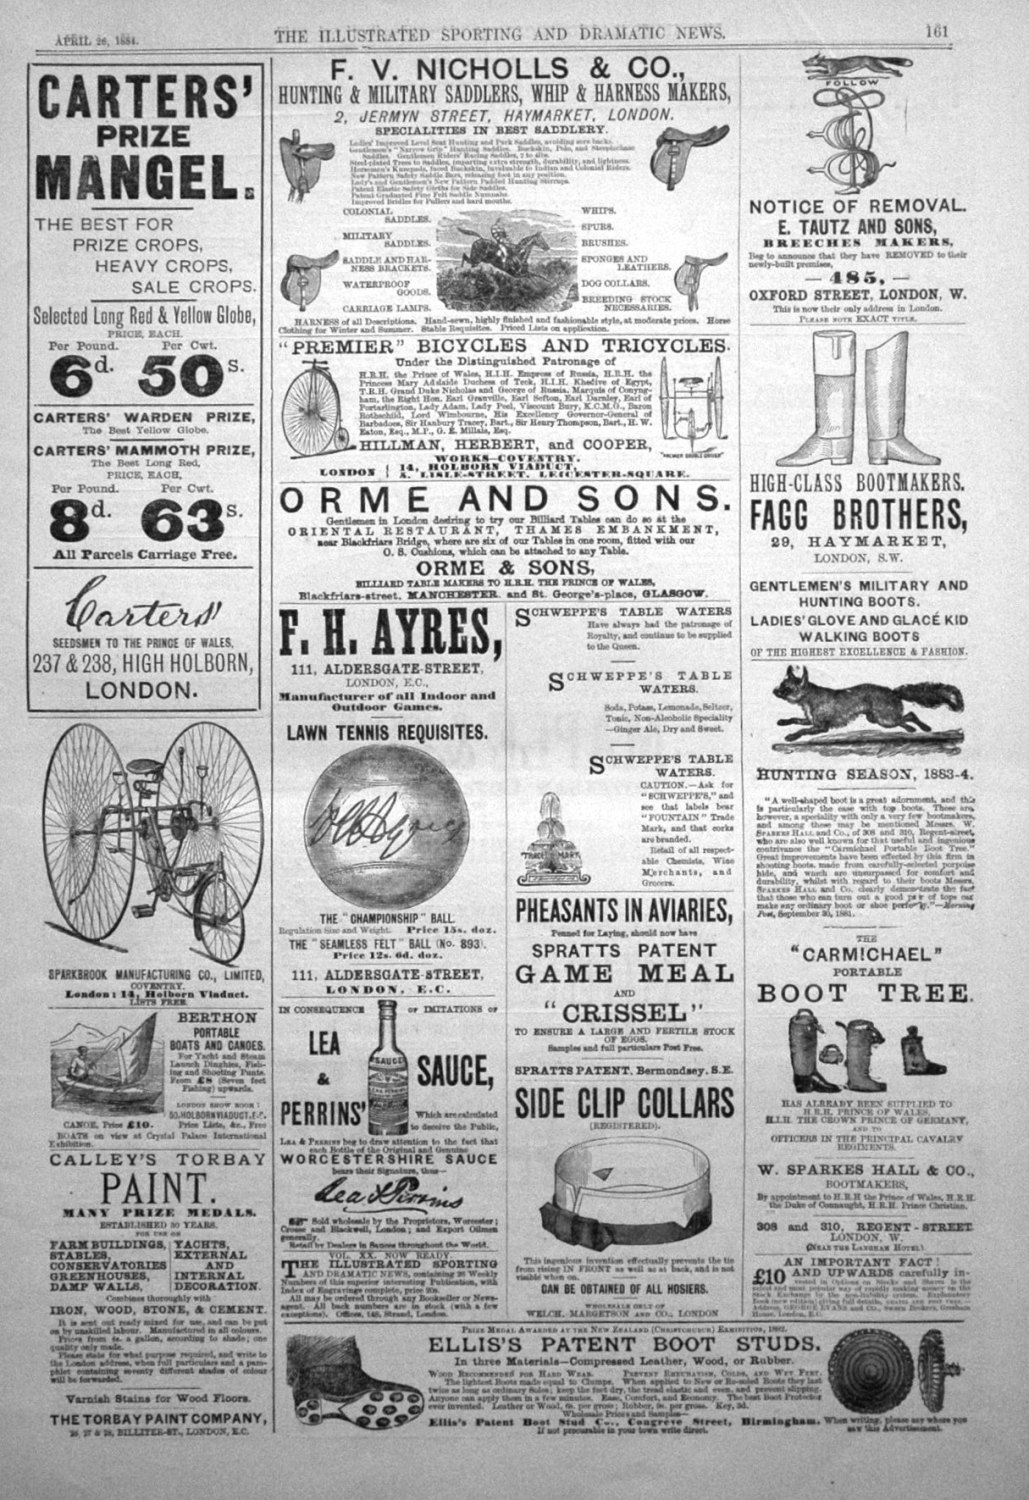 Adverts. Illustrated Sporting and Dramatic News April 26th 1884.